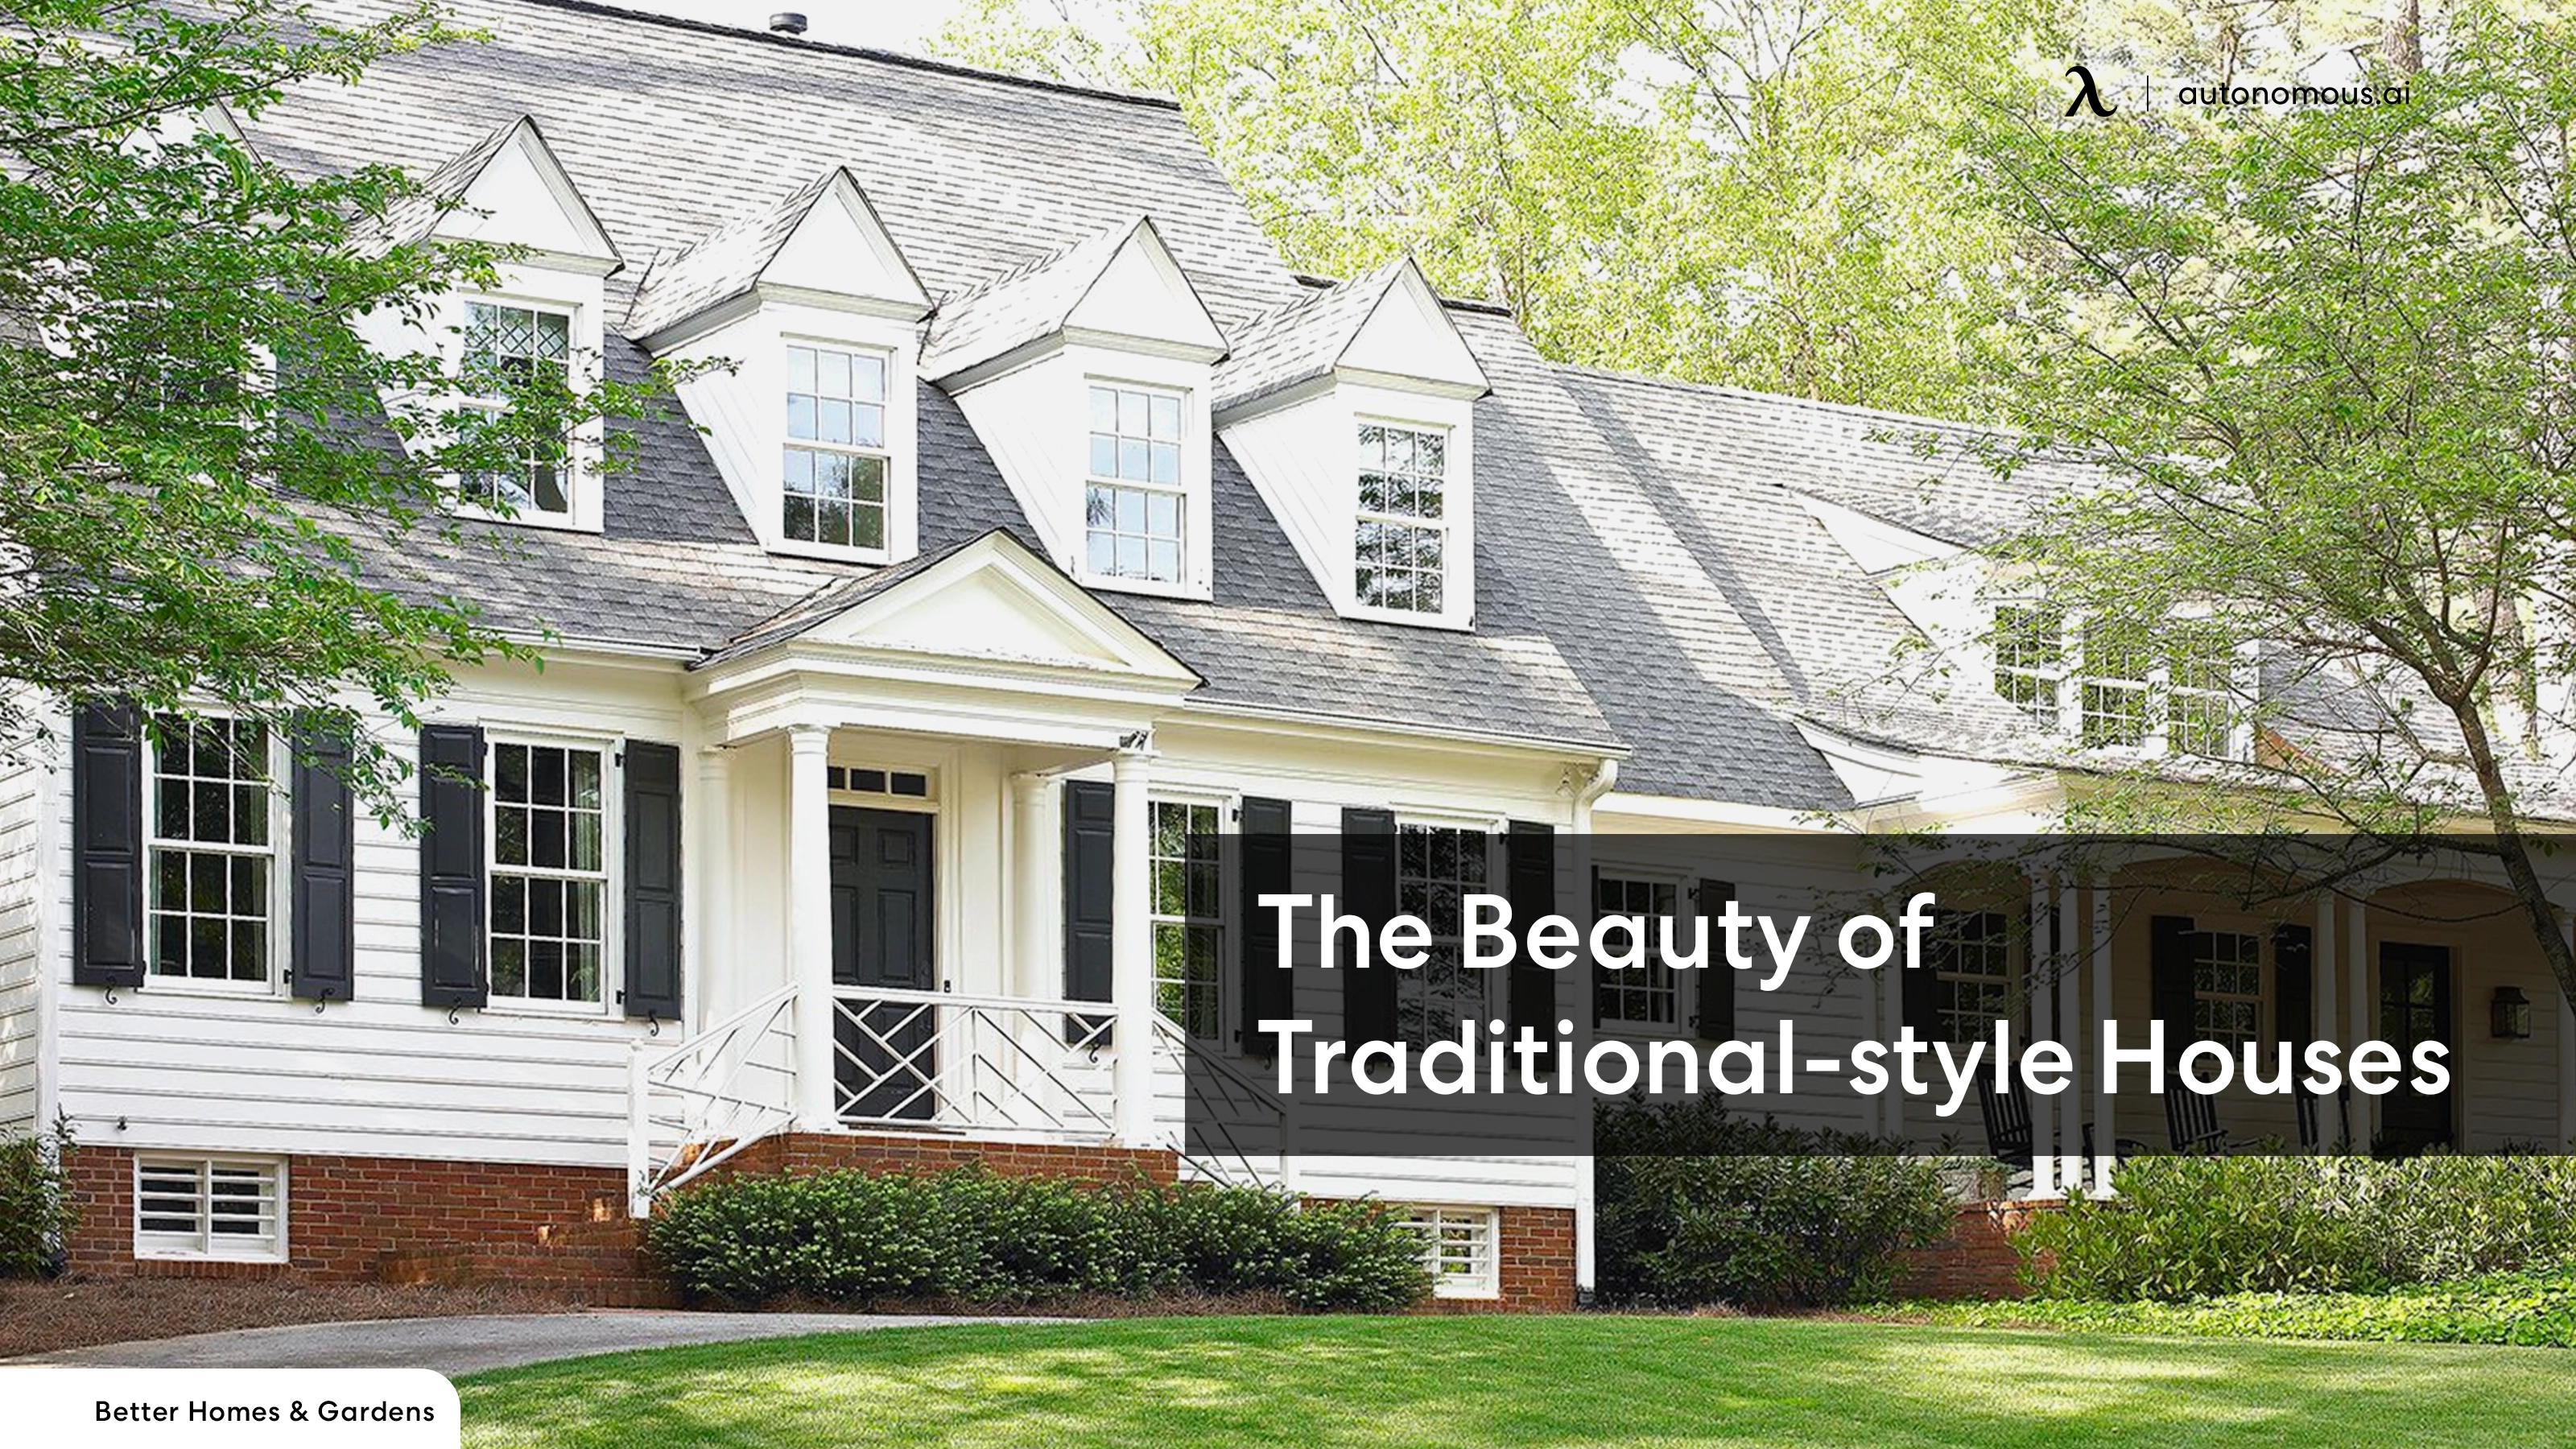 Timeless Elegance: The Beauty of Traditional-style Houses